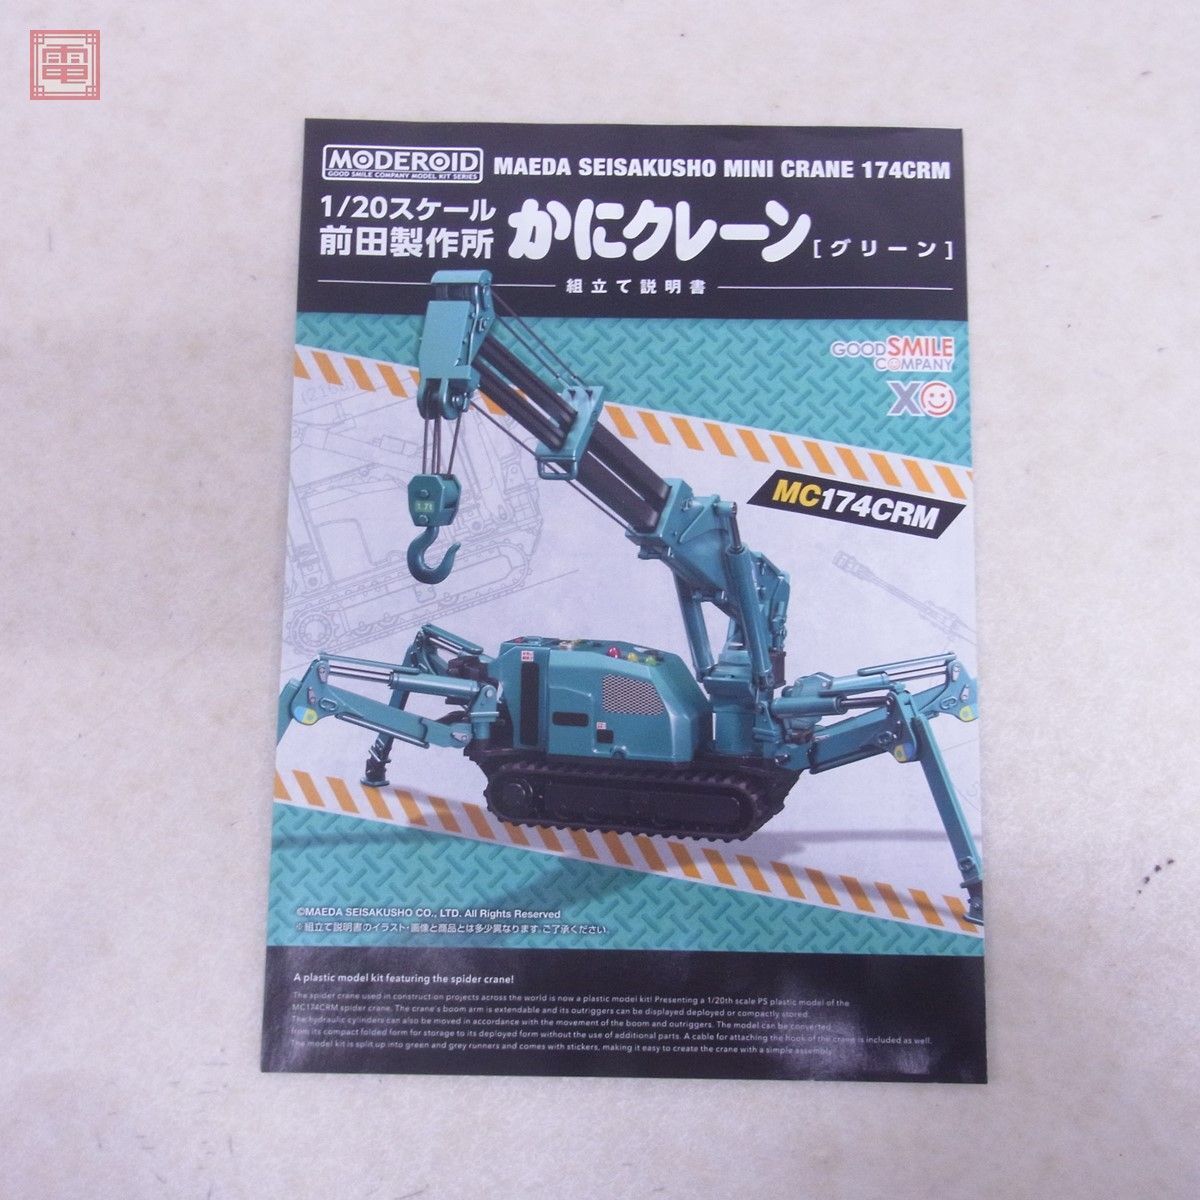  not yet constructed gdo Smile Company MODEROID crab crane /PMCsa-belas company egzo frame /RSC equipment ... type egzo frame total 3 point set [20